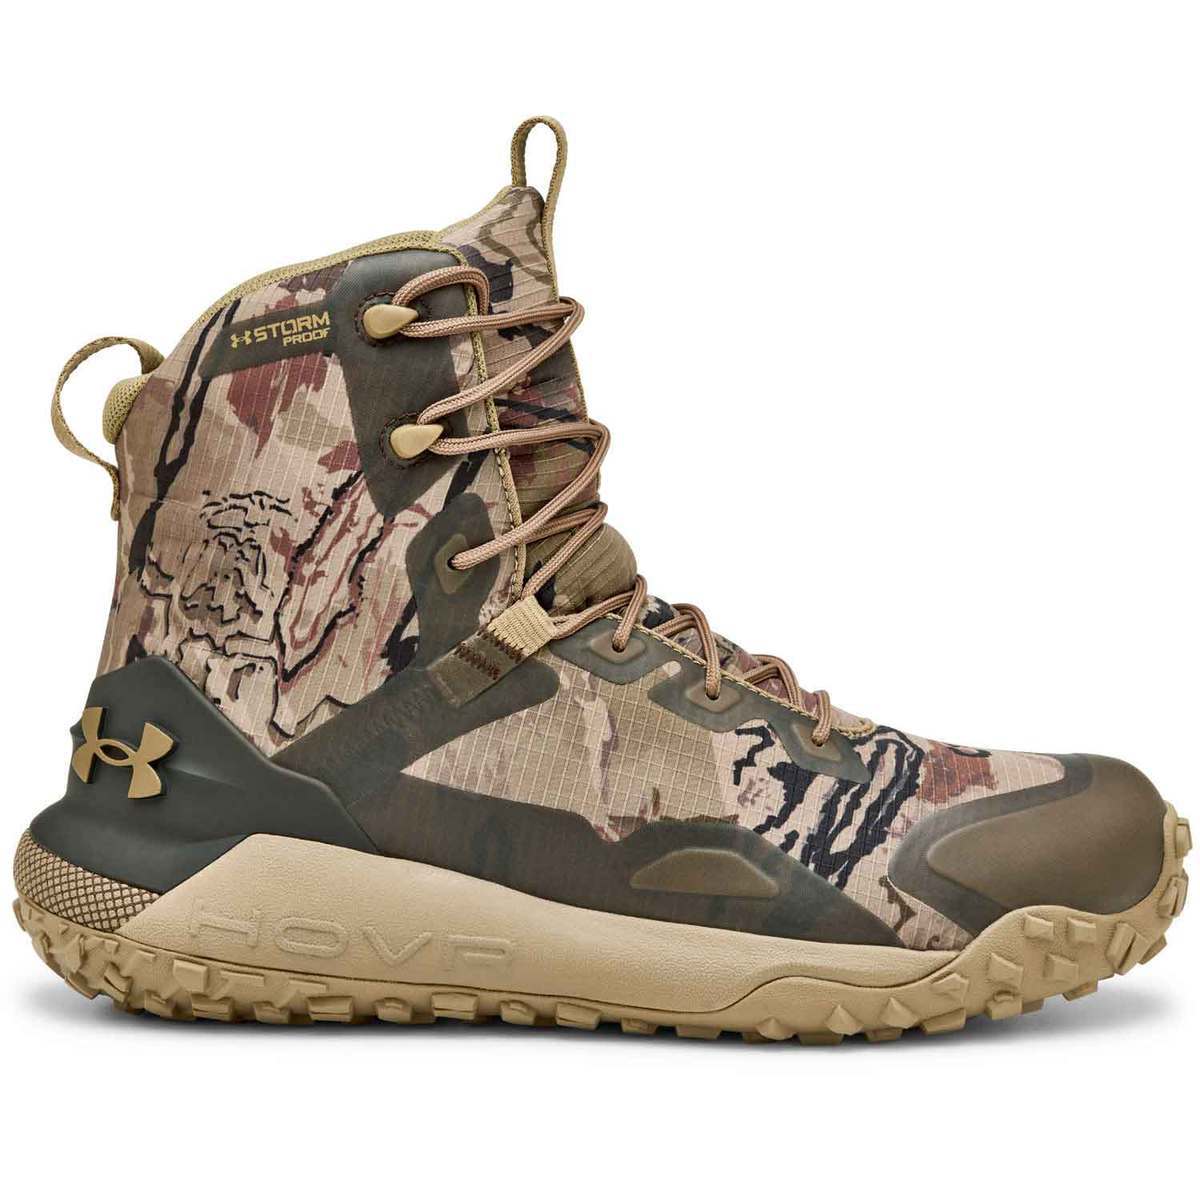 Under Armour Men's HOVR Dawn Uninsulated Waterproof Hunting Boots - Under Armour Barren - Size 9 